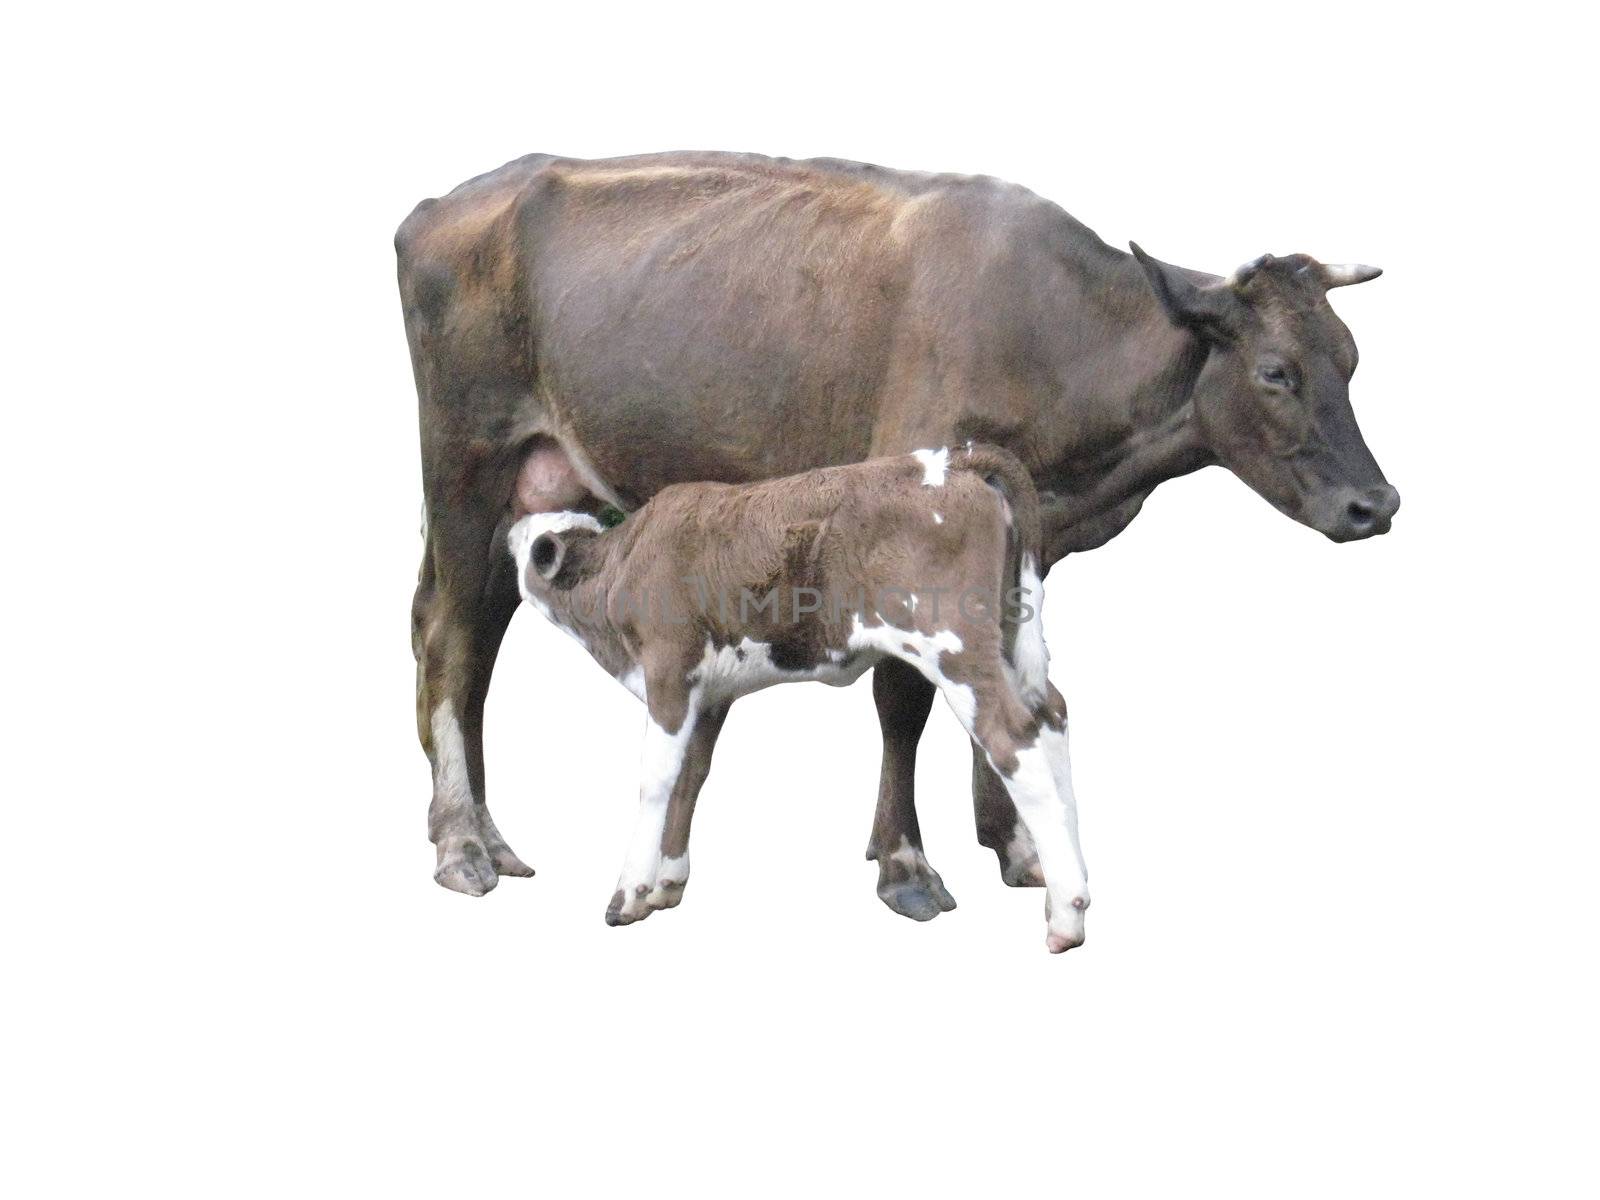 the grey cow with its little calf on the white background